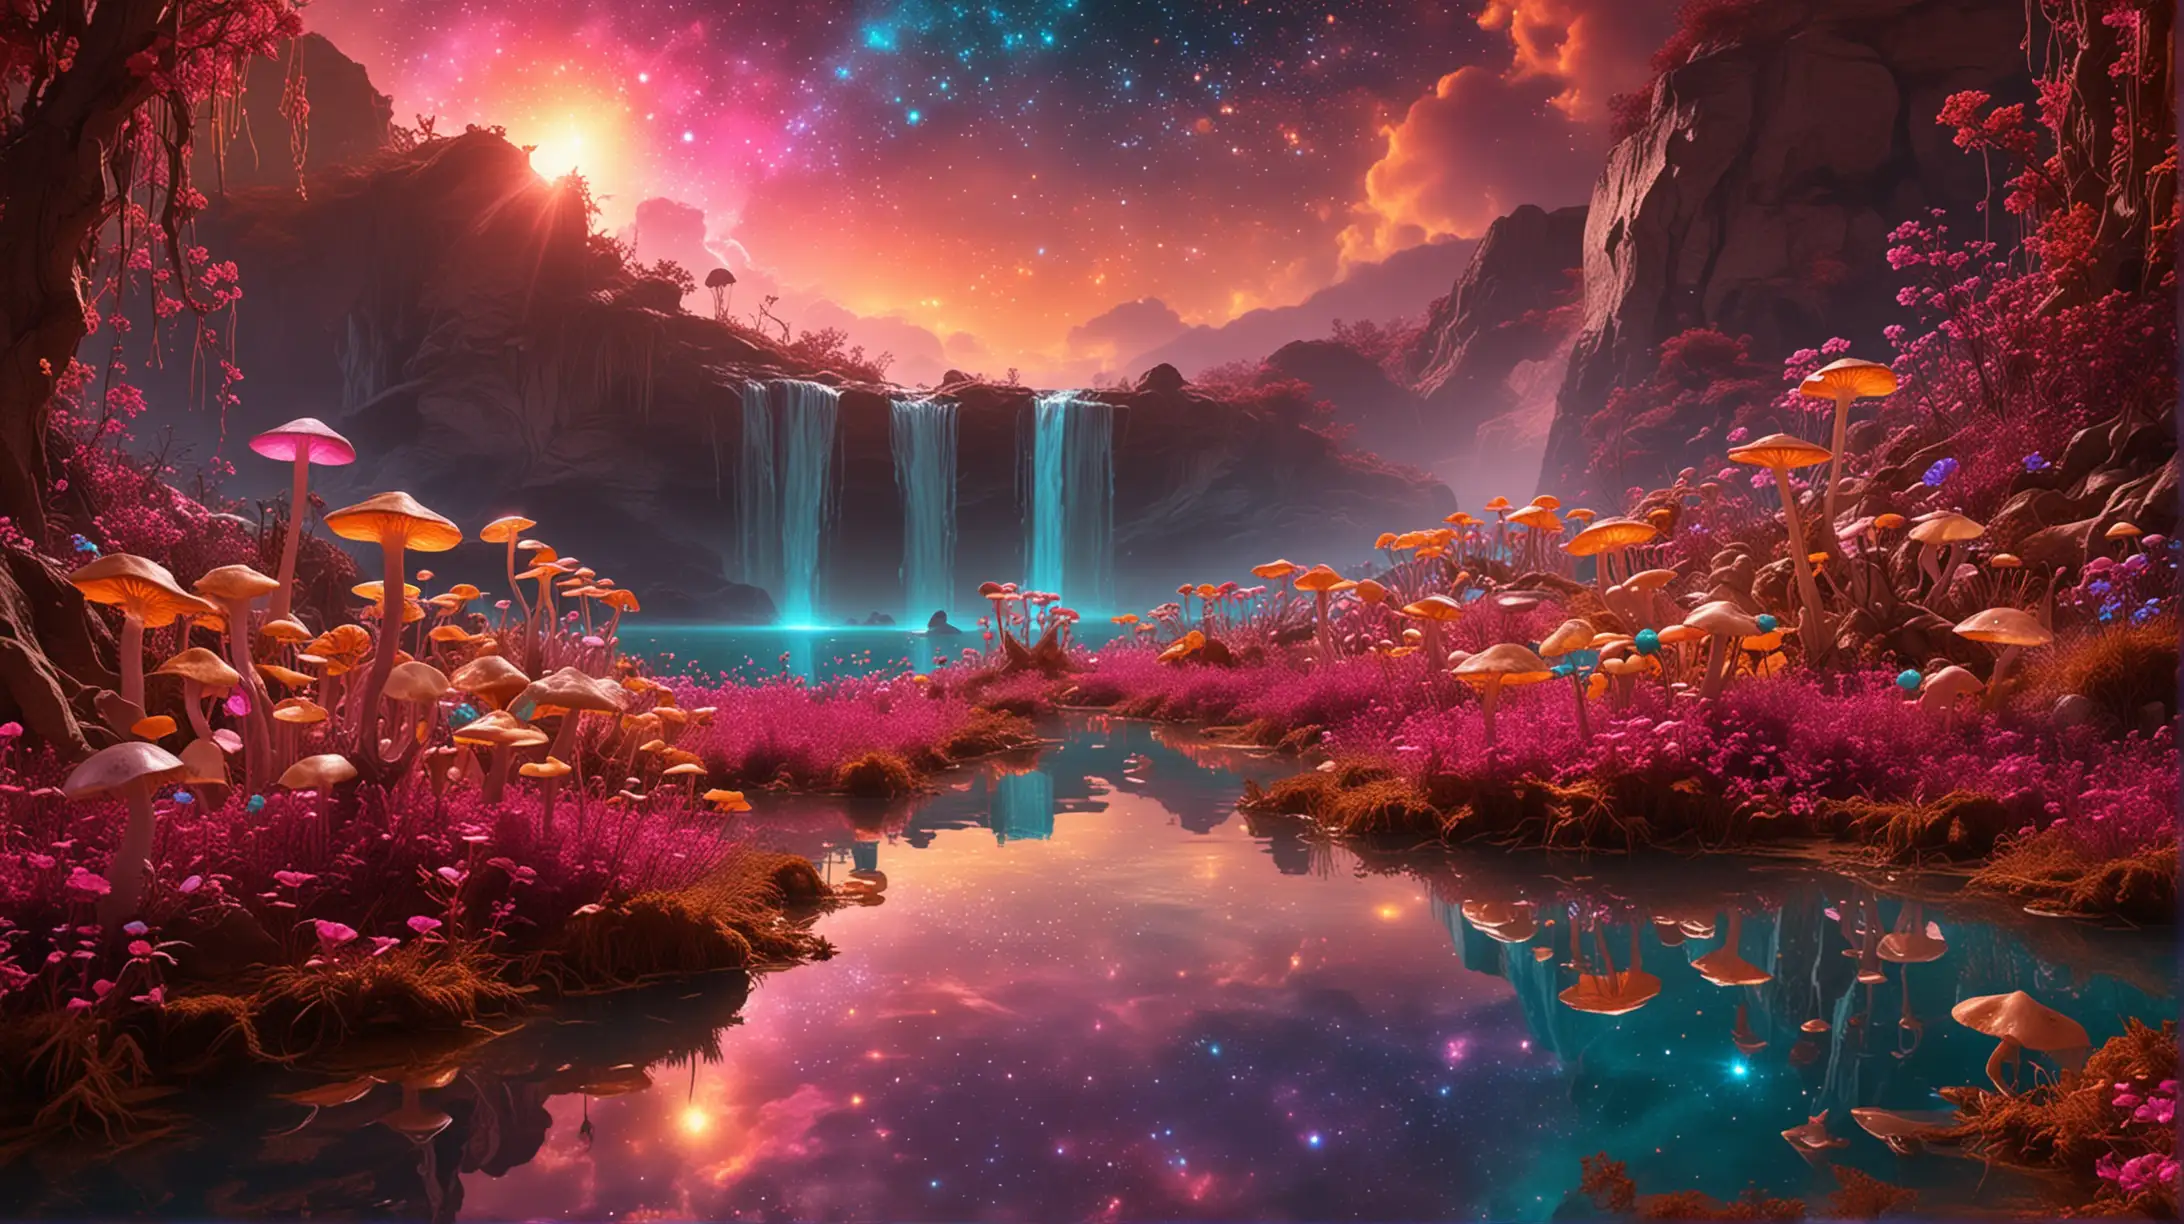 Enchanting Neon Mushroom Forest and Turquoise Glowing Lake